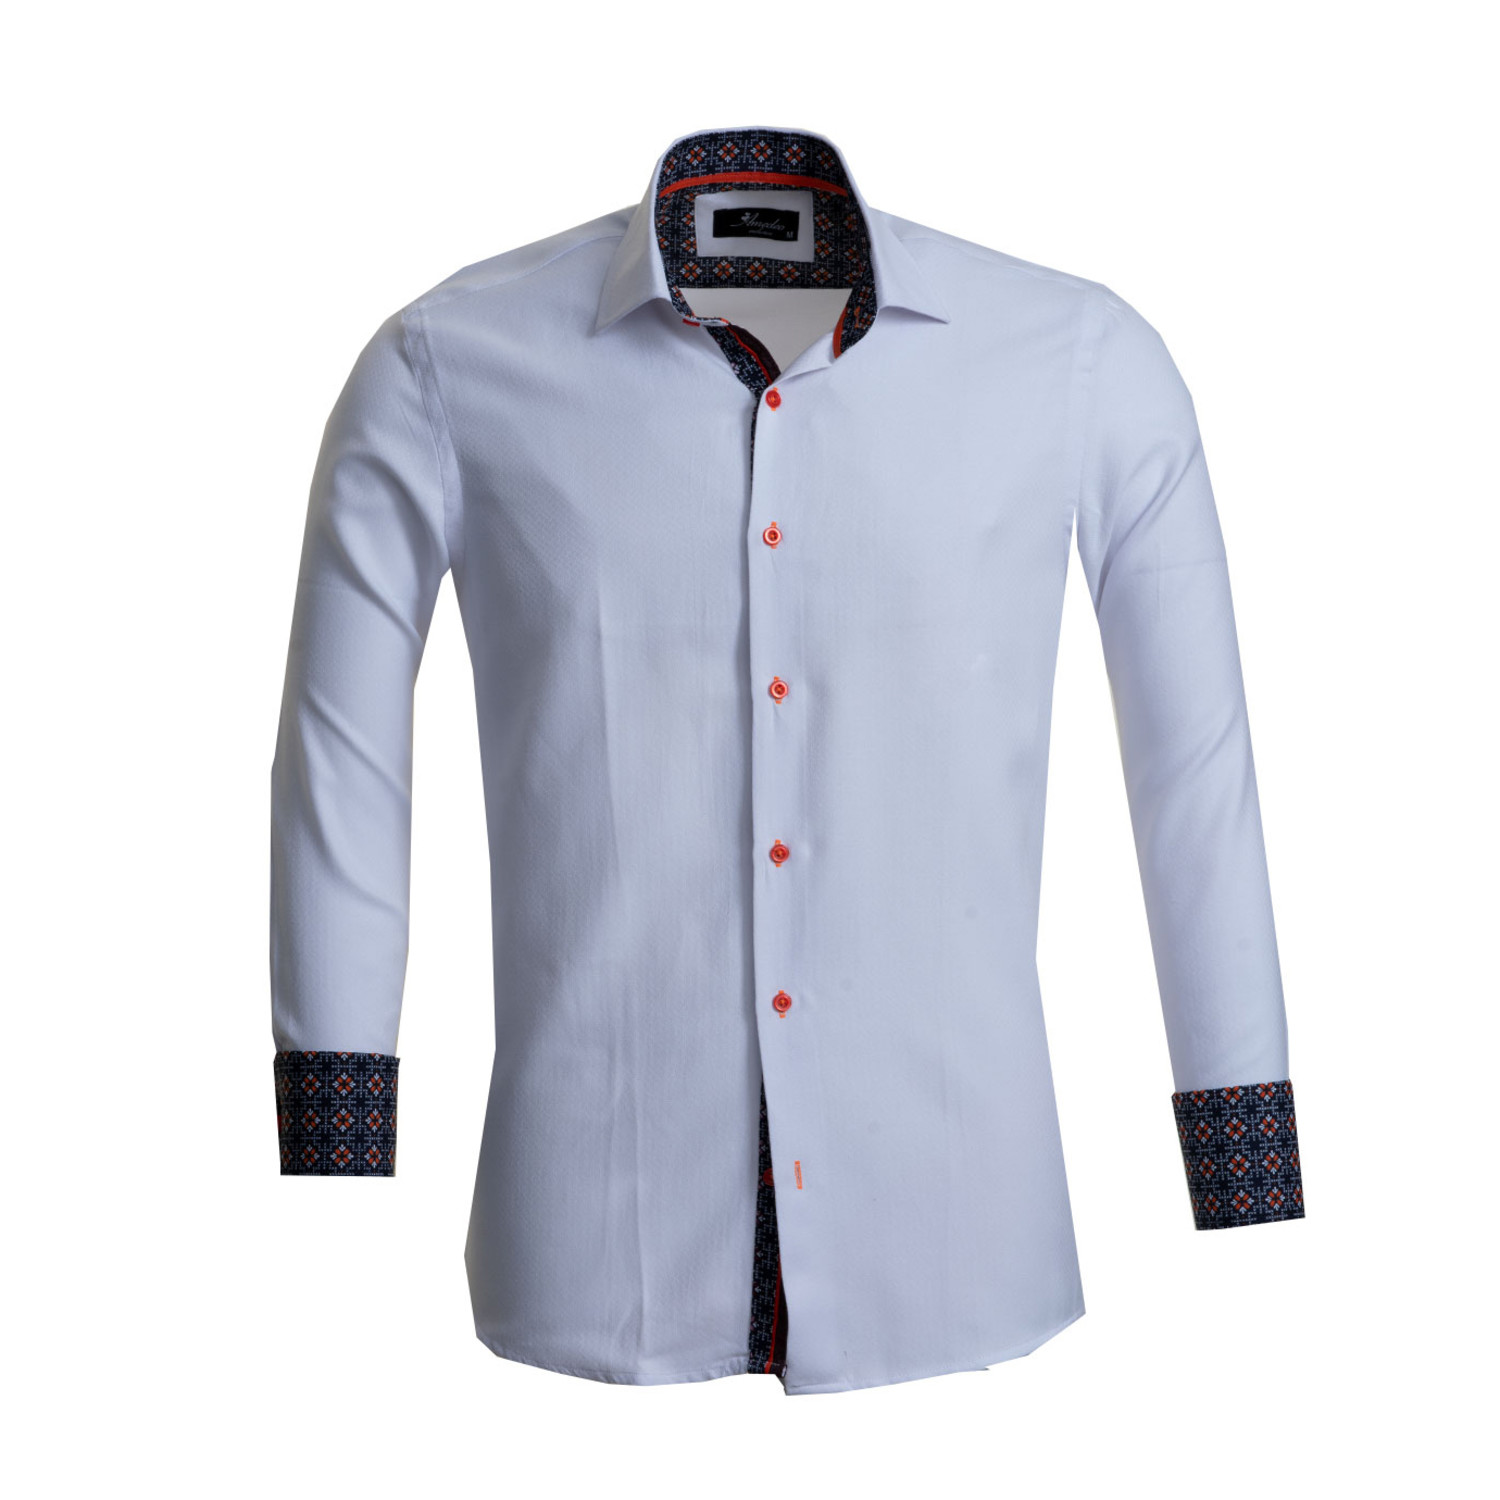 Amedeo Exclusive // Reversible Cuff French Cuff Dress Shirt // Textured ...